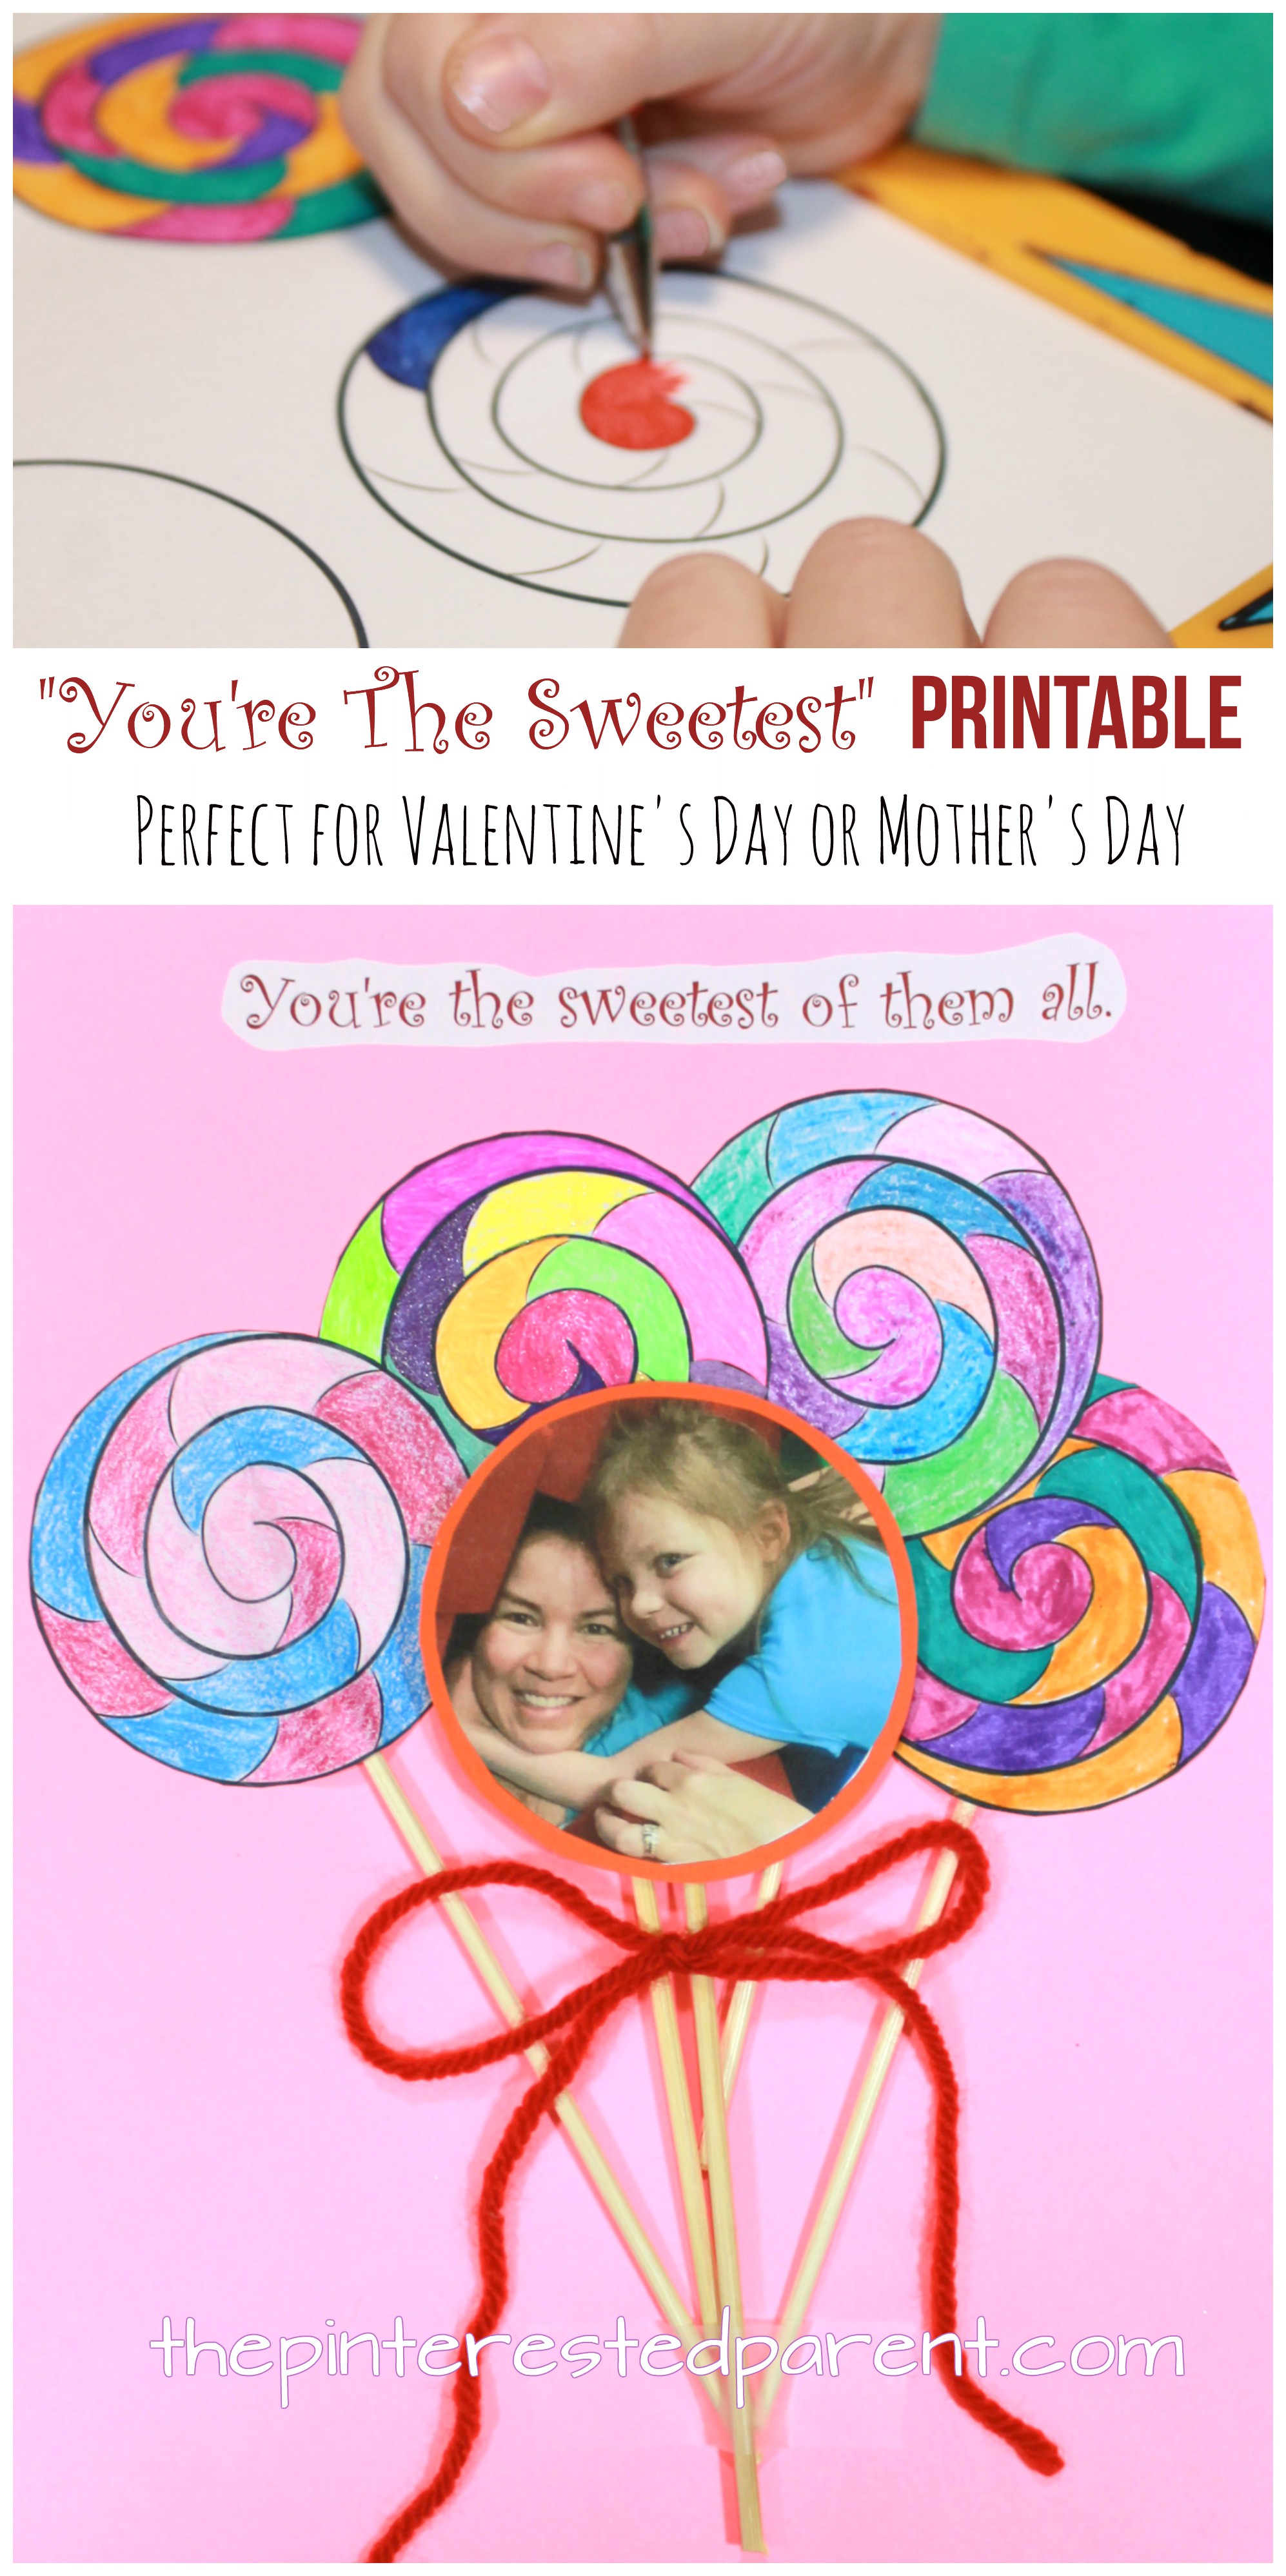 "You're The Sweetest" Lollipop Printable for Valentine's Day or Mother's Day or just because. A cute card idea. Just print, color and glue. Arts and crafts for kids